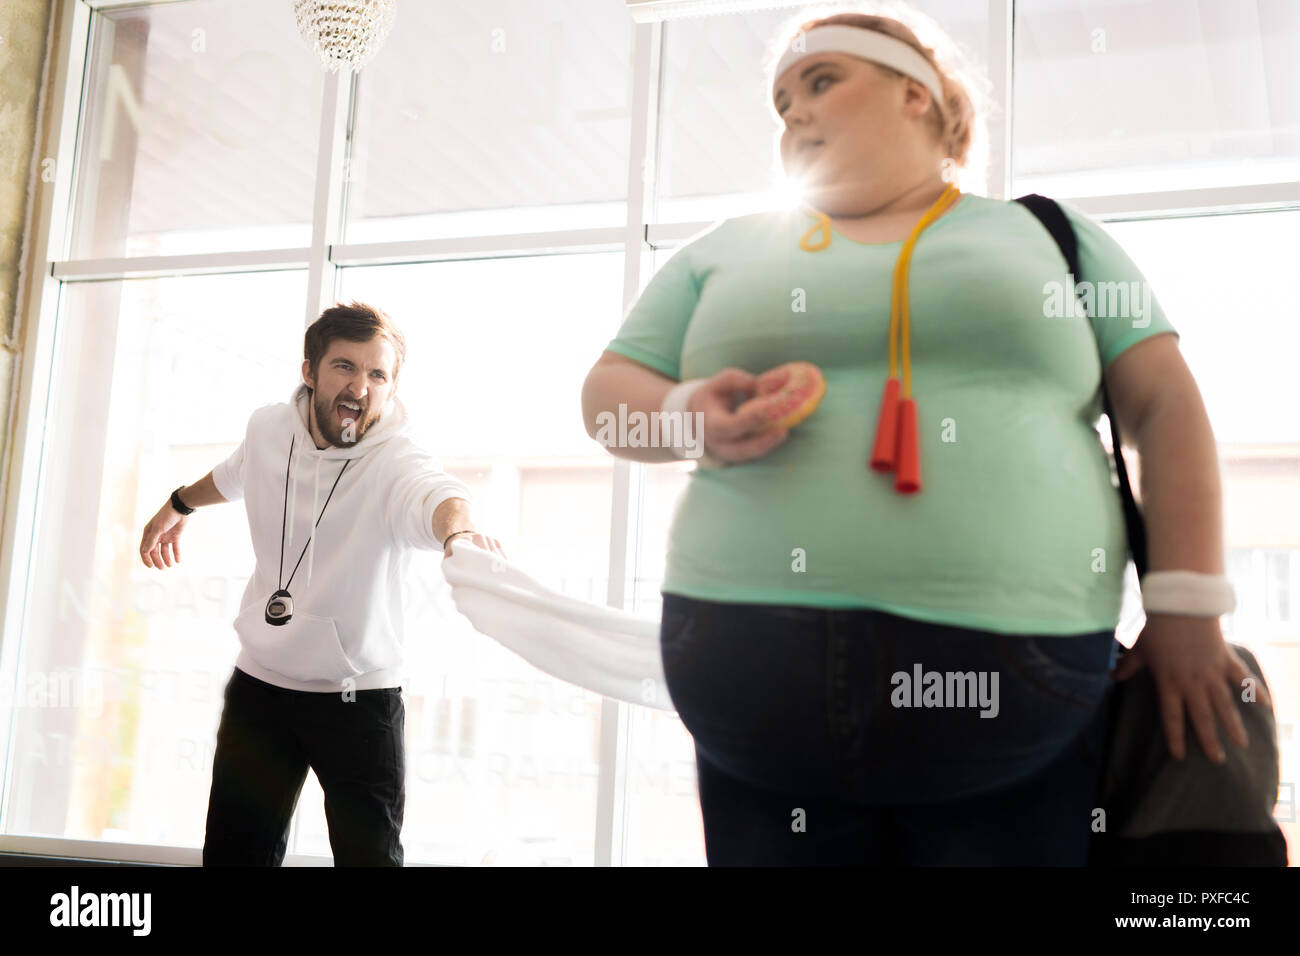 Obese Woman Refusing to Train Stock Photo